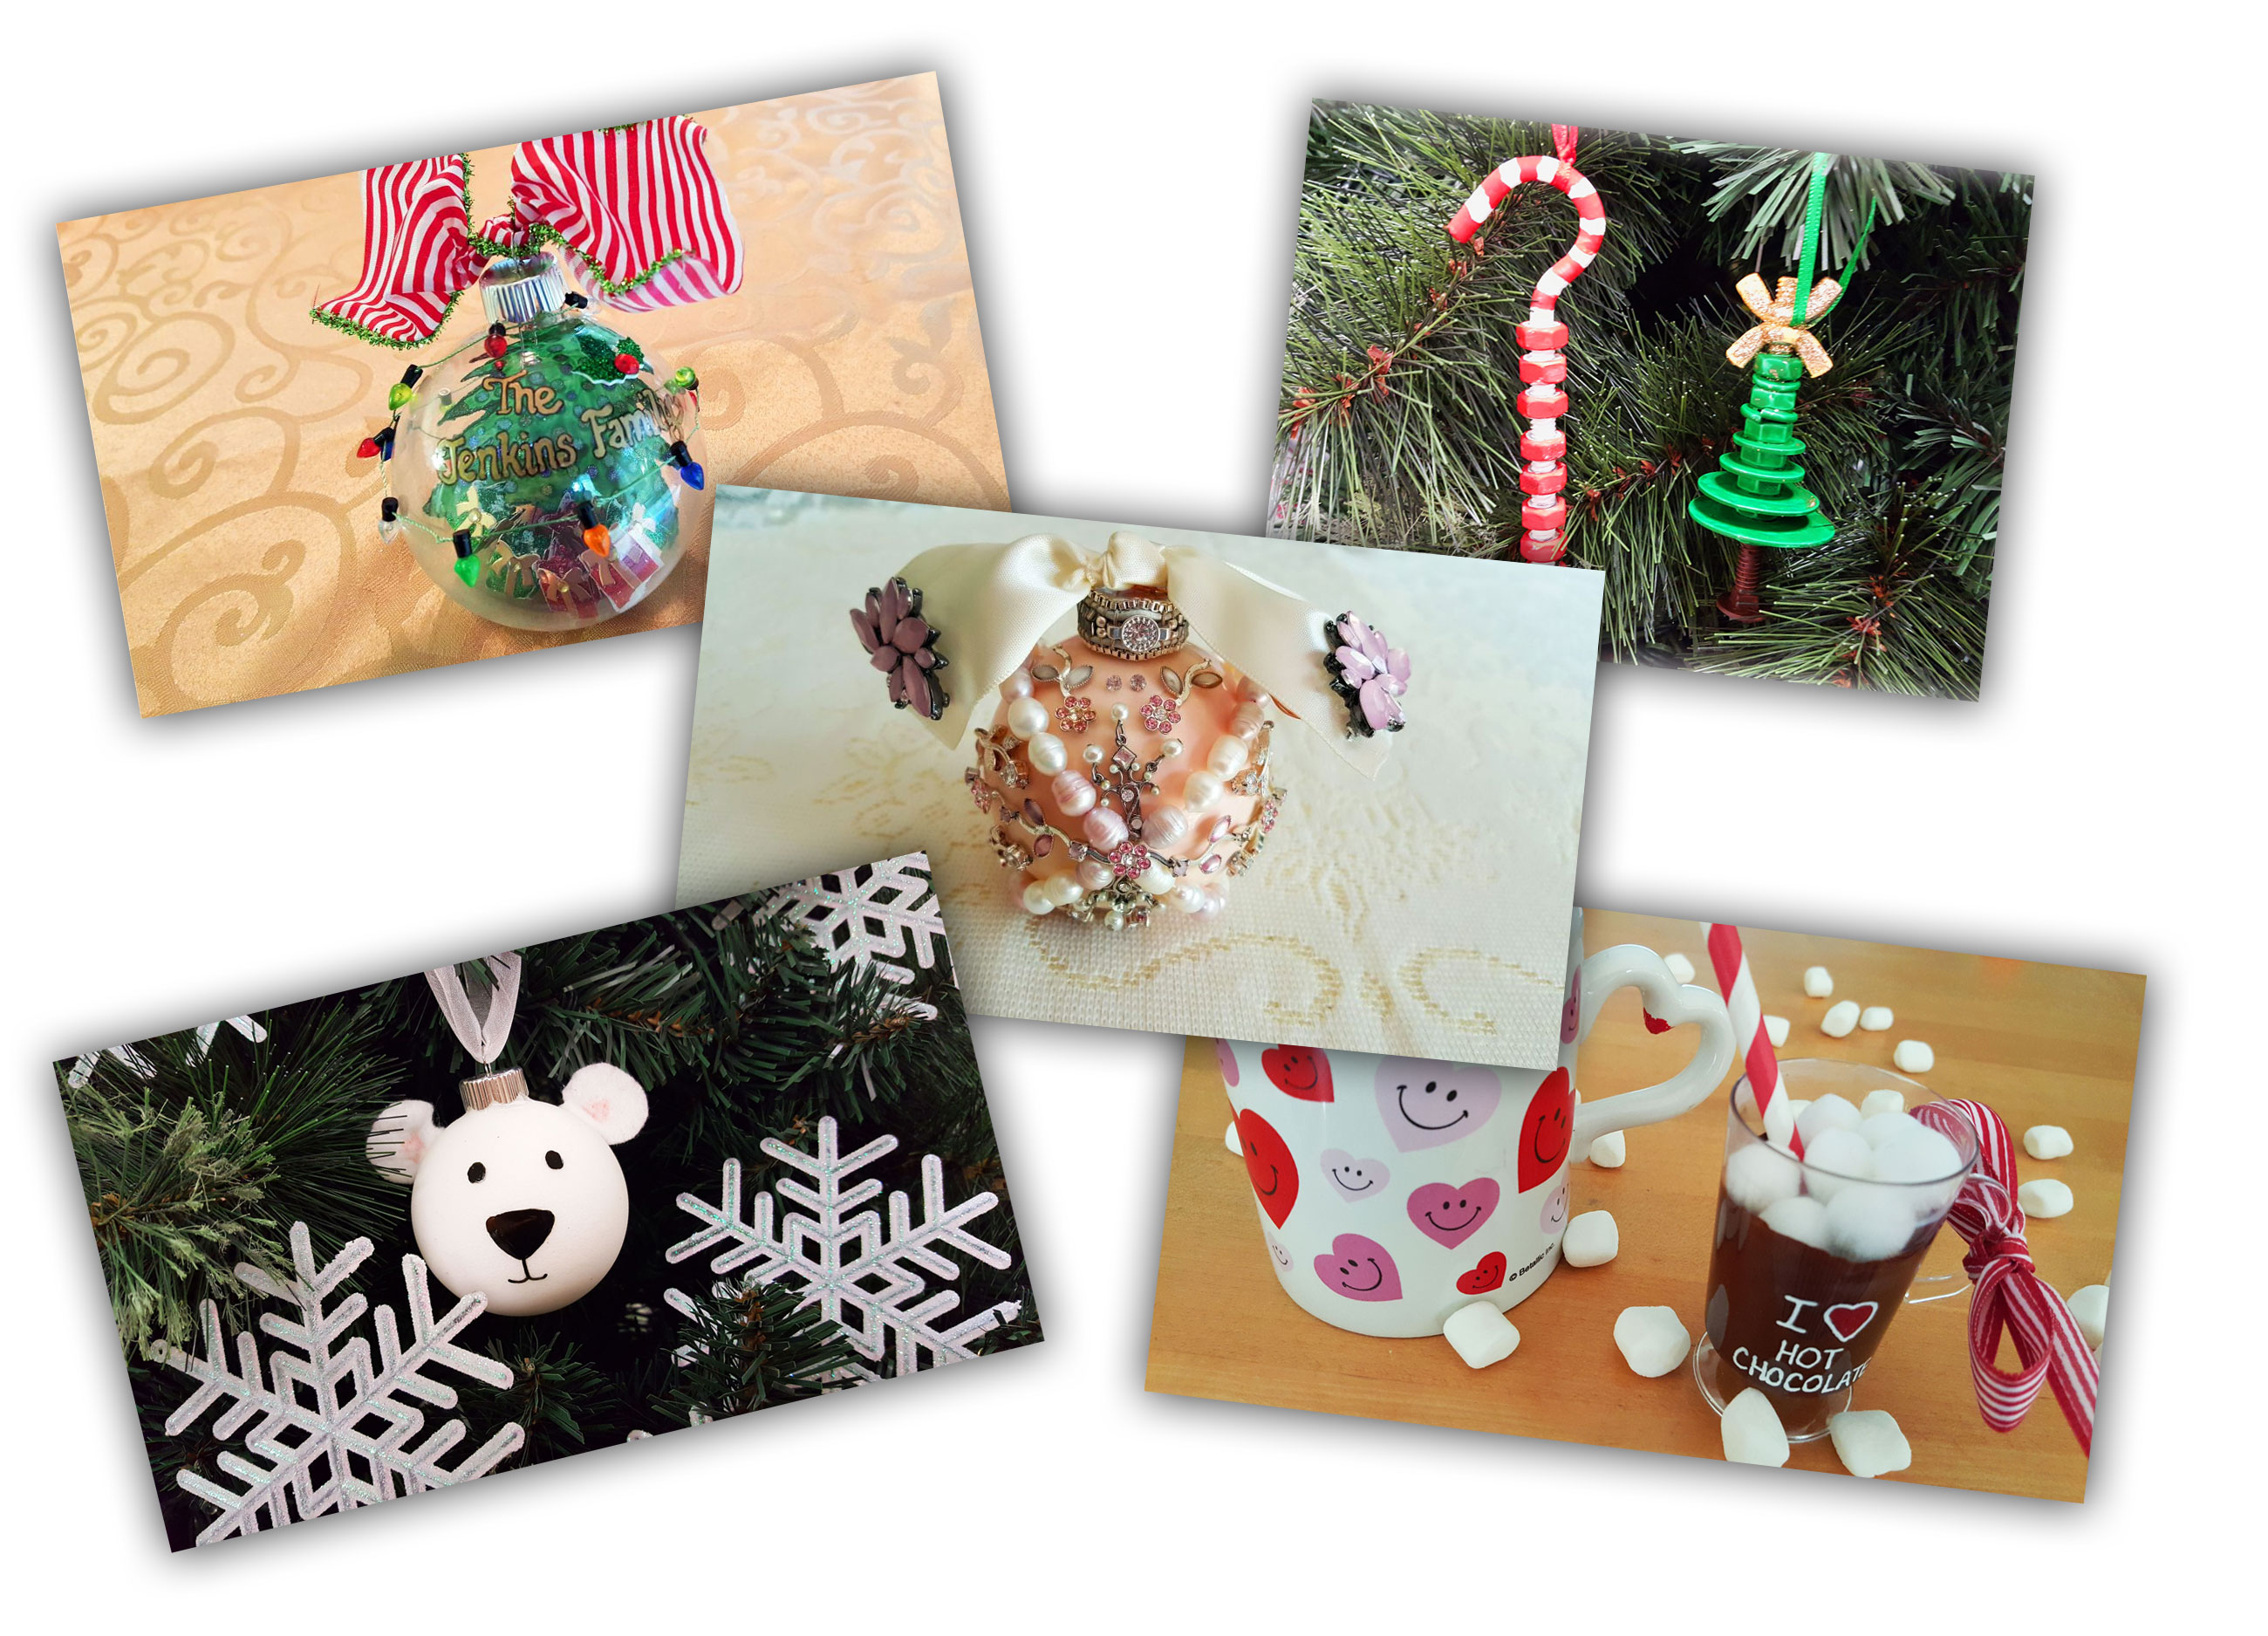 Find projects to create your own ornament for an ornament gift exchange! | OrnamentShop.com